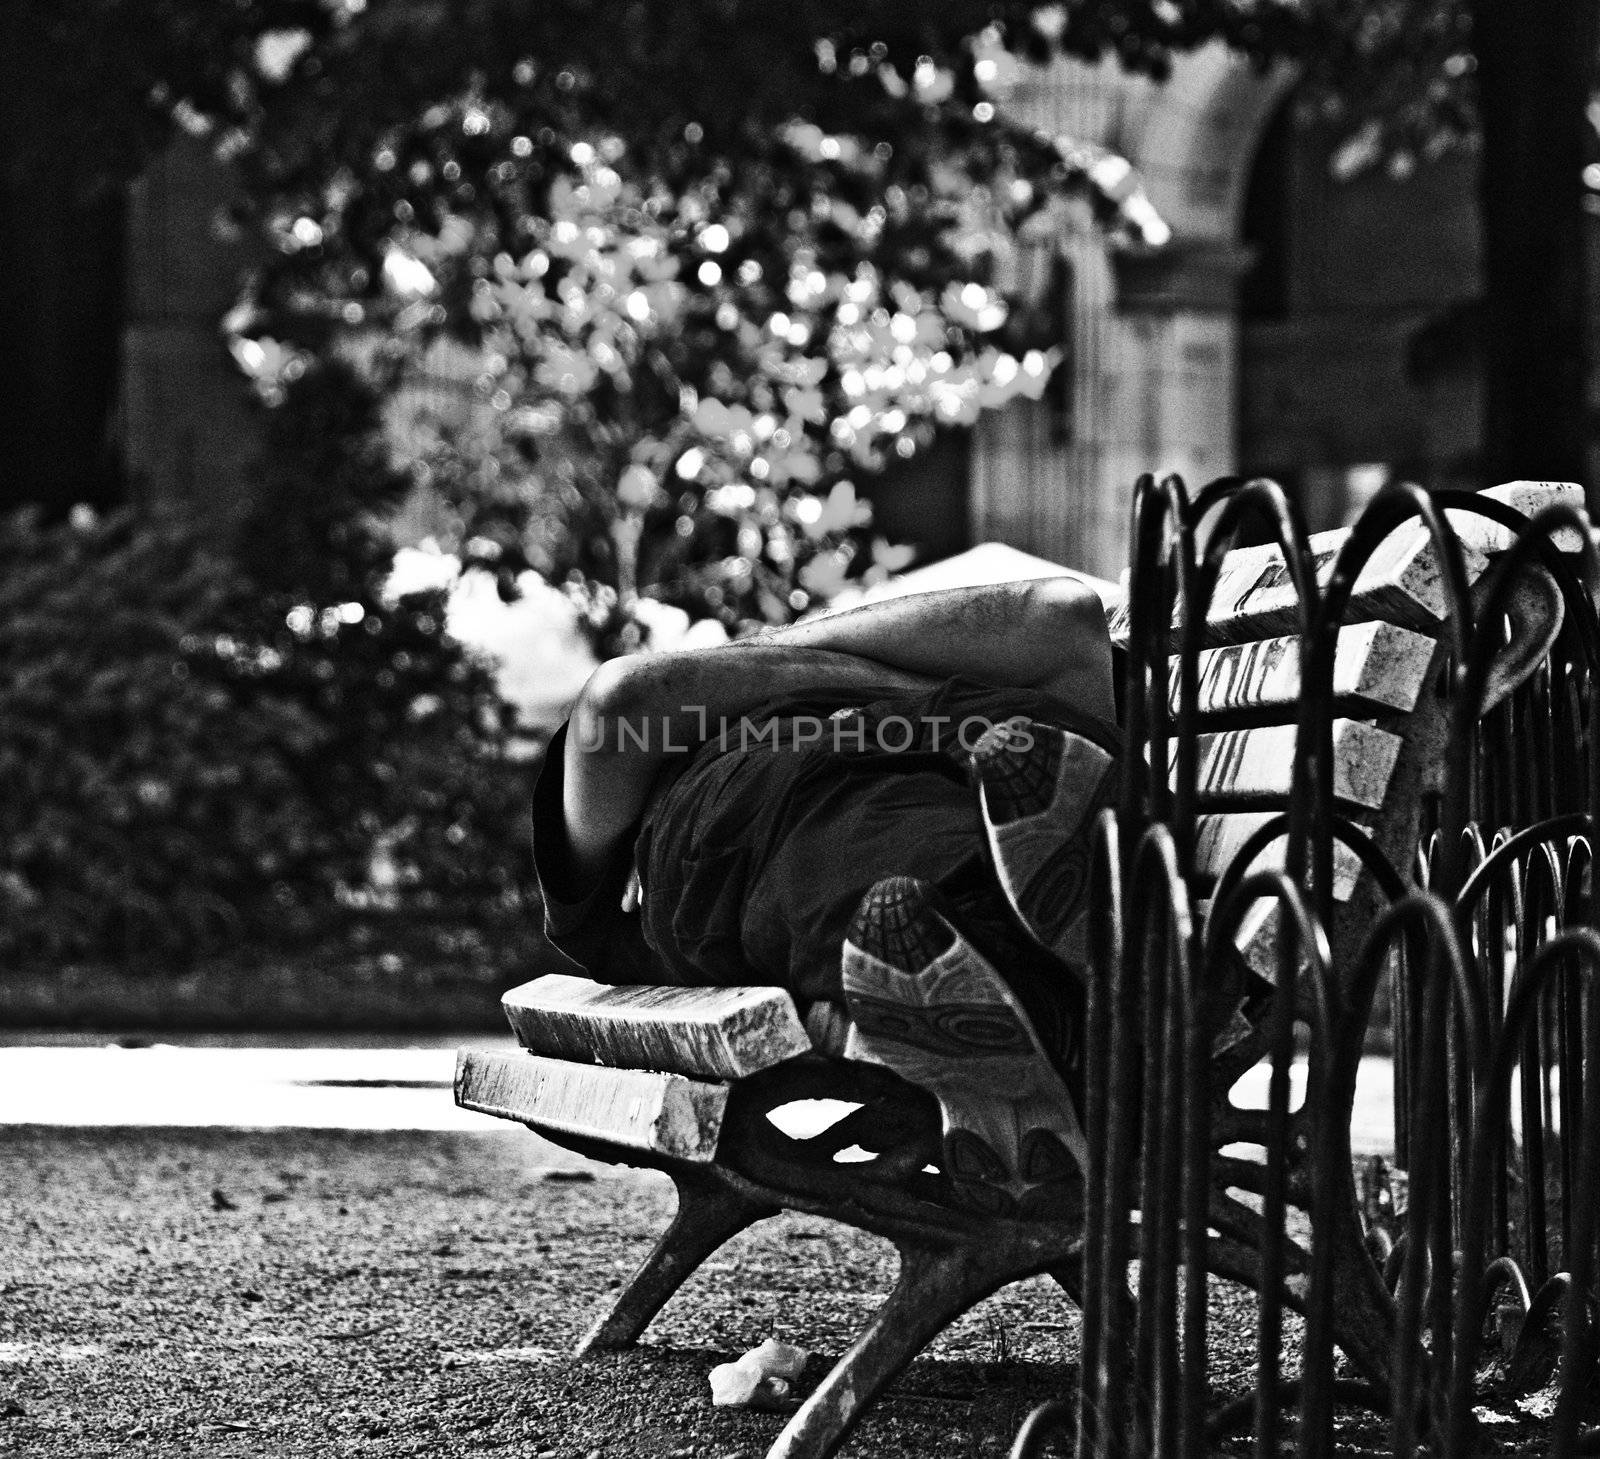 A man is sleeping on a bench, we can see his feet, legs and his crossed arms. The photograph is in black and white.